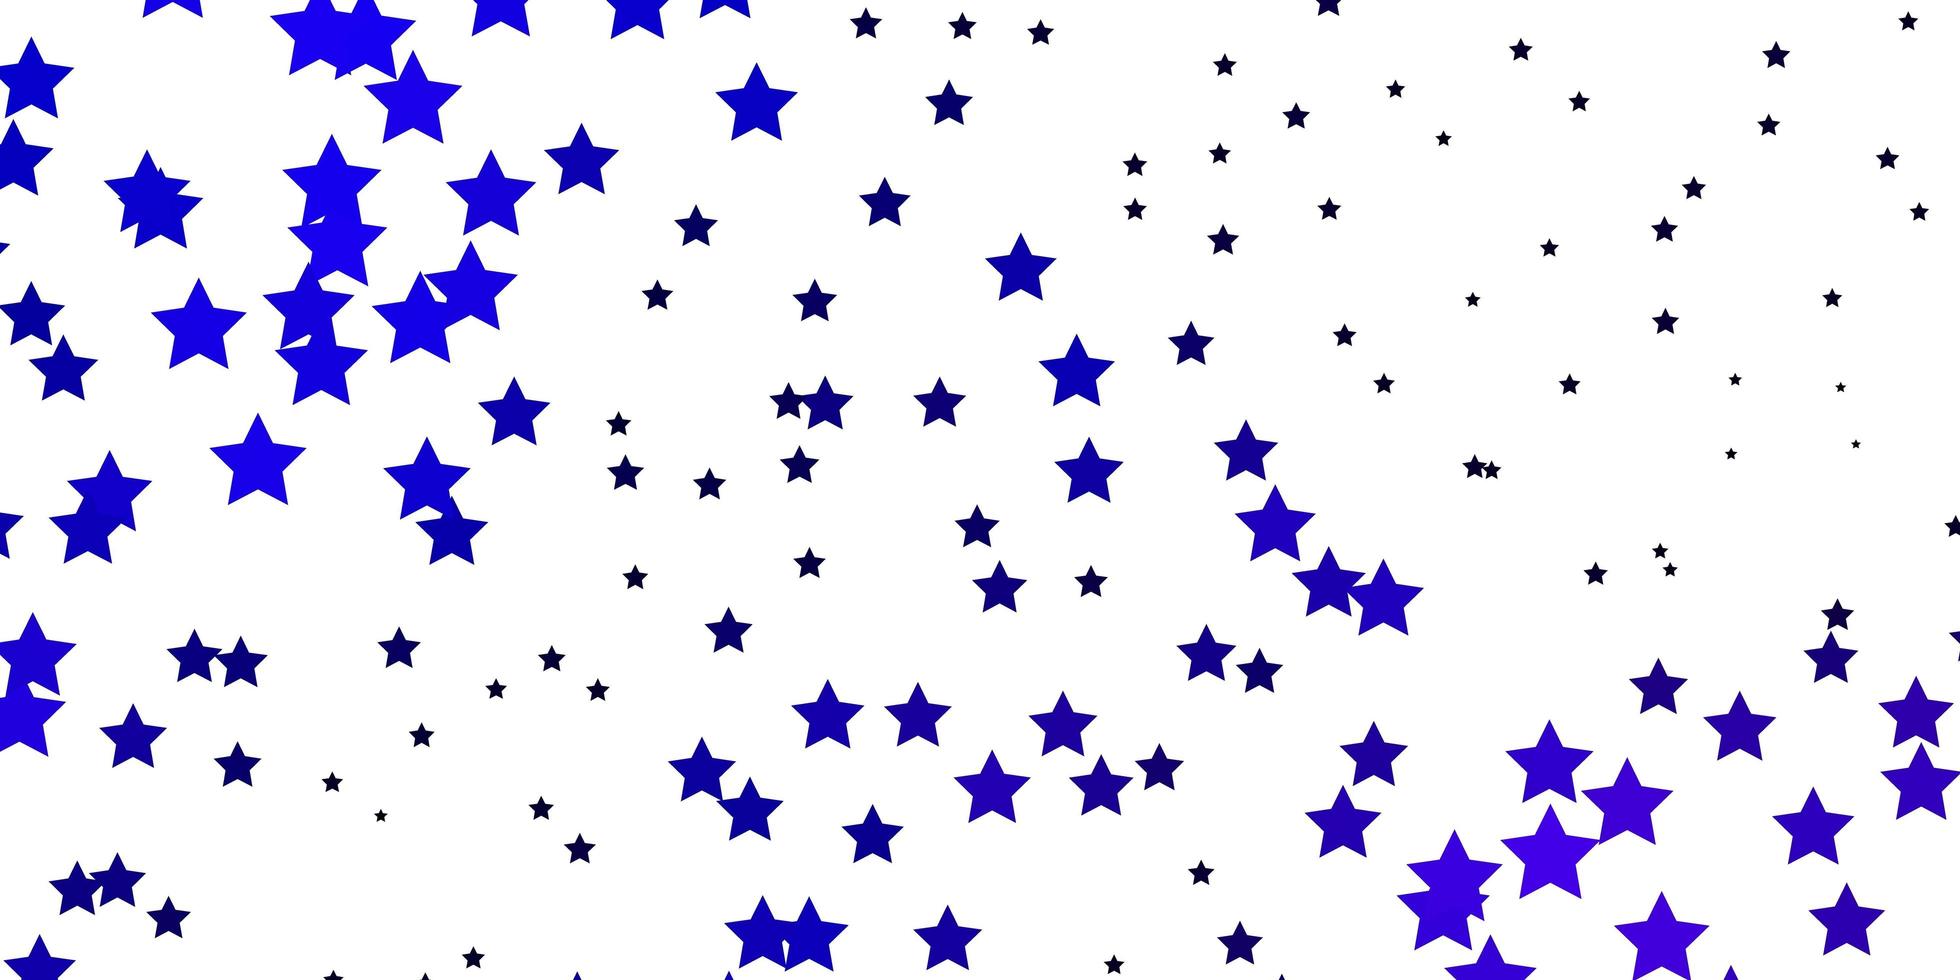 Dark Purple vector background with colorful stars. Shining colorful illustration with small and big stars. Best design for your ad, poster, banner.